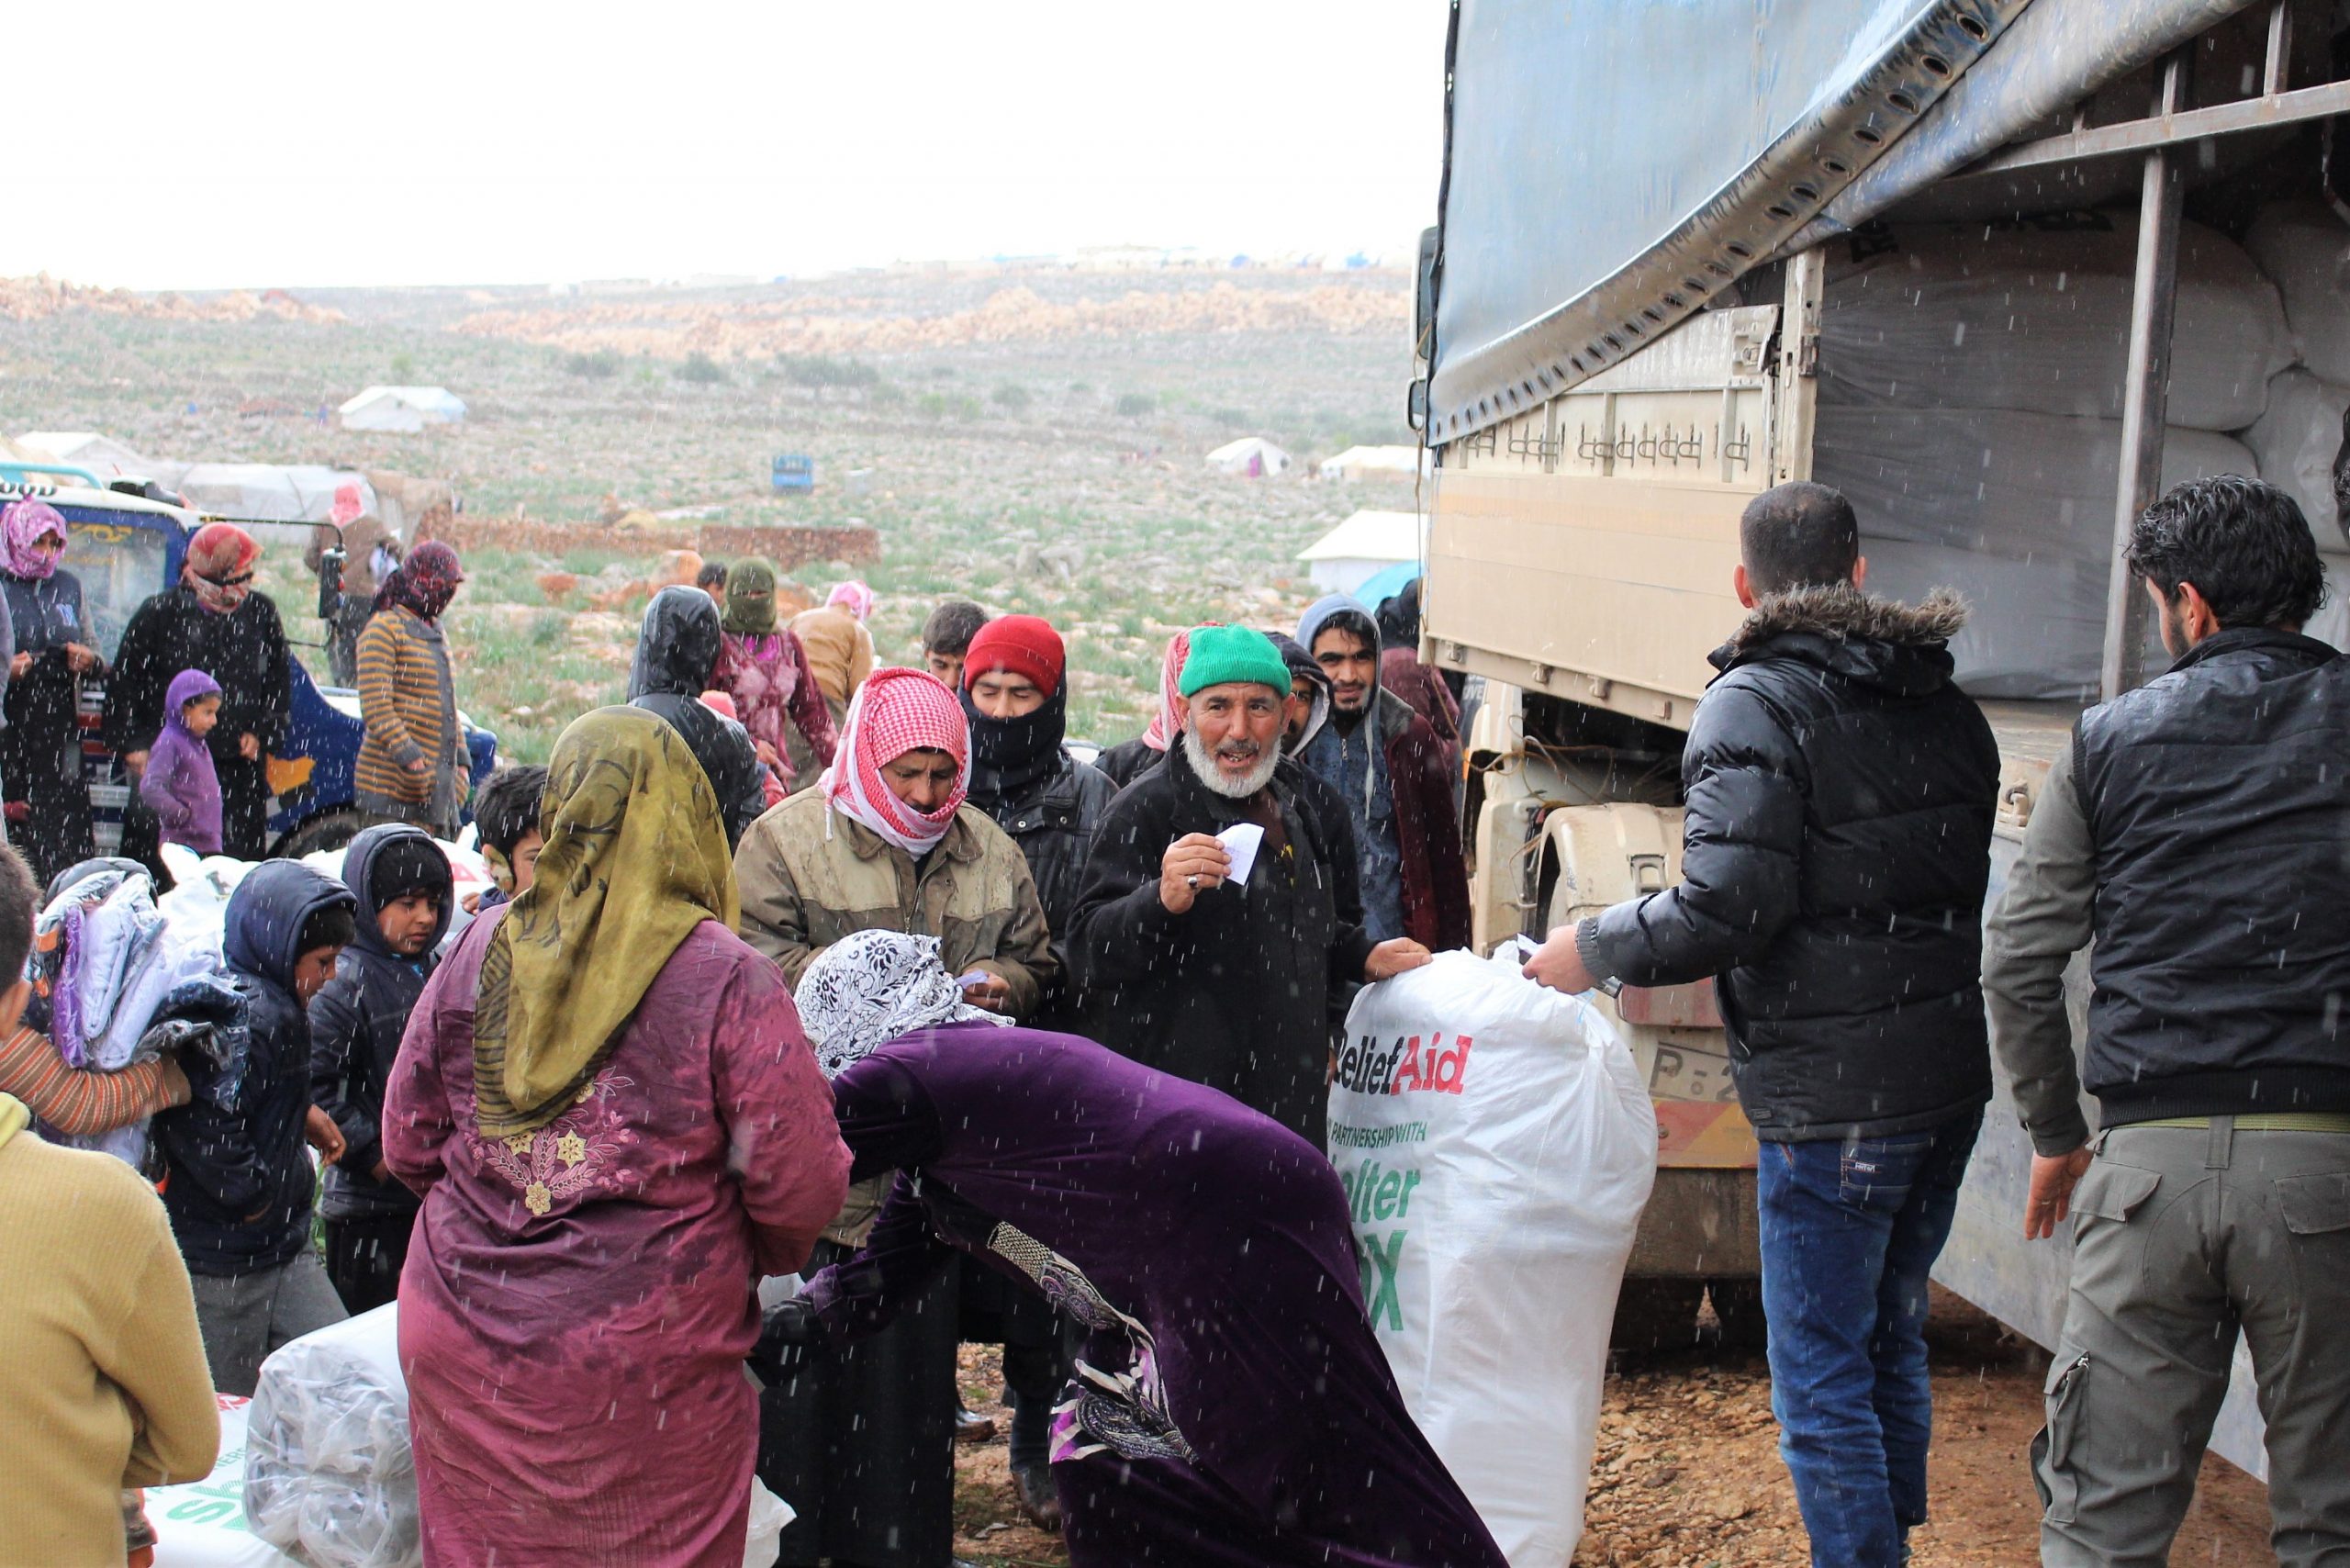 ShelterBix and ReliefAid aid being unloaded from a truck and handed to people in Syria